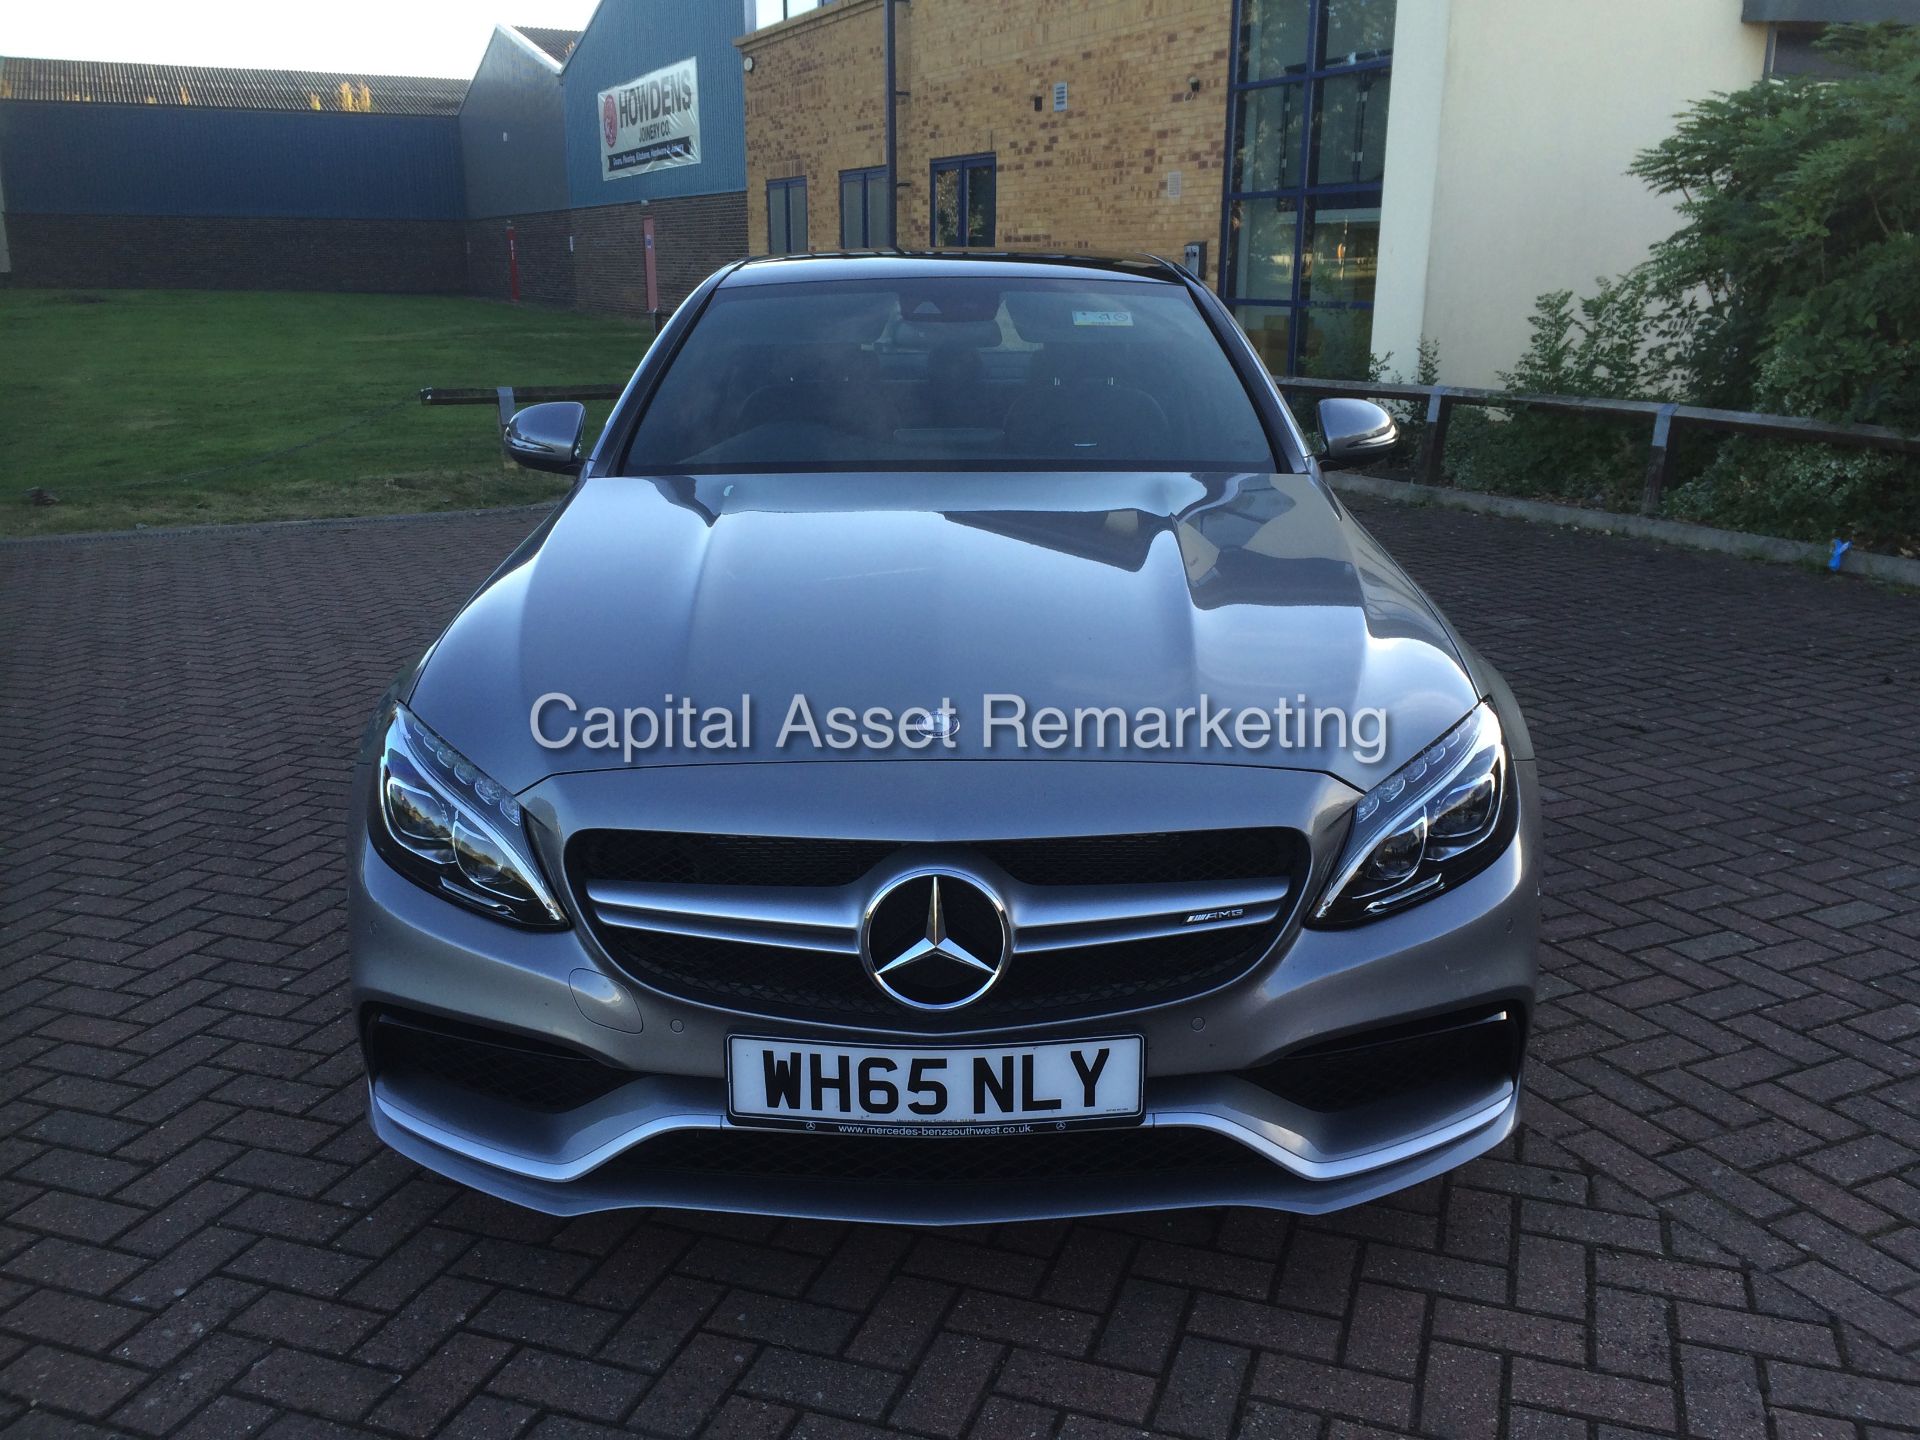 (On Sale) MERCEDES C63 "AMG PREMIUM" V8 BI-TURBO (2016) - 1 OWNER-COMMAND-LEATHER - PAN ROOF *LOOK* - Image 2 of 28